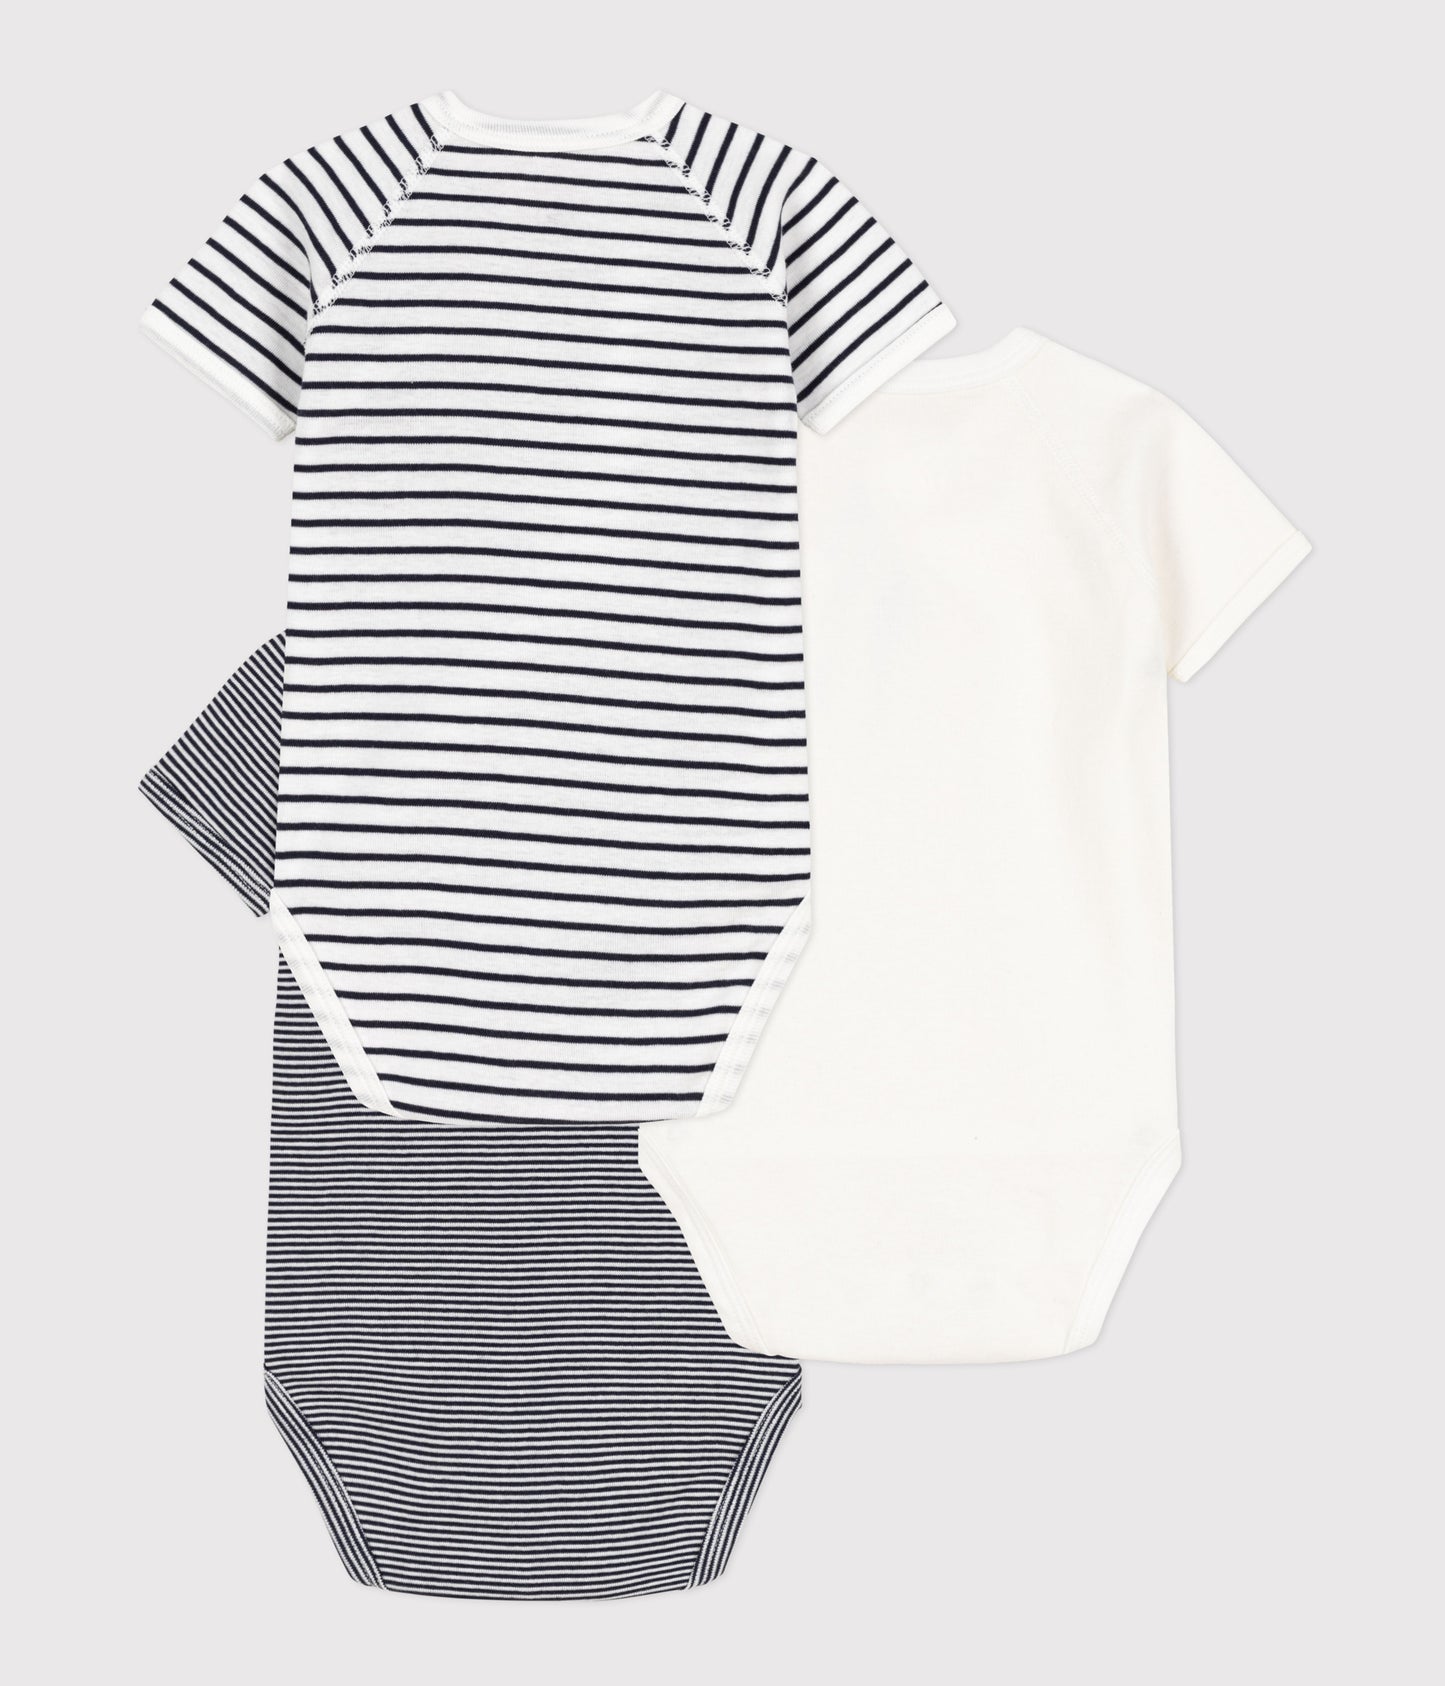 Petite Bateau Baby Boy 3Pk SS Crossover Striped Solid Bodysuits